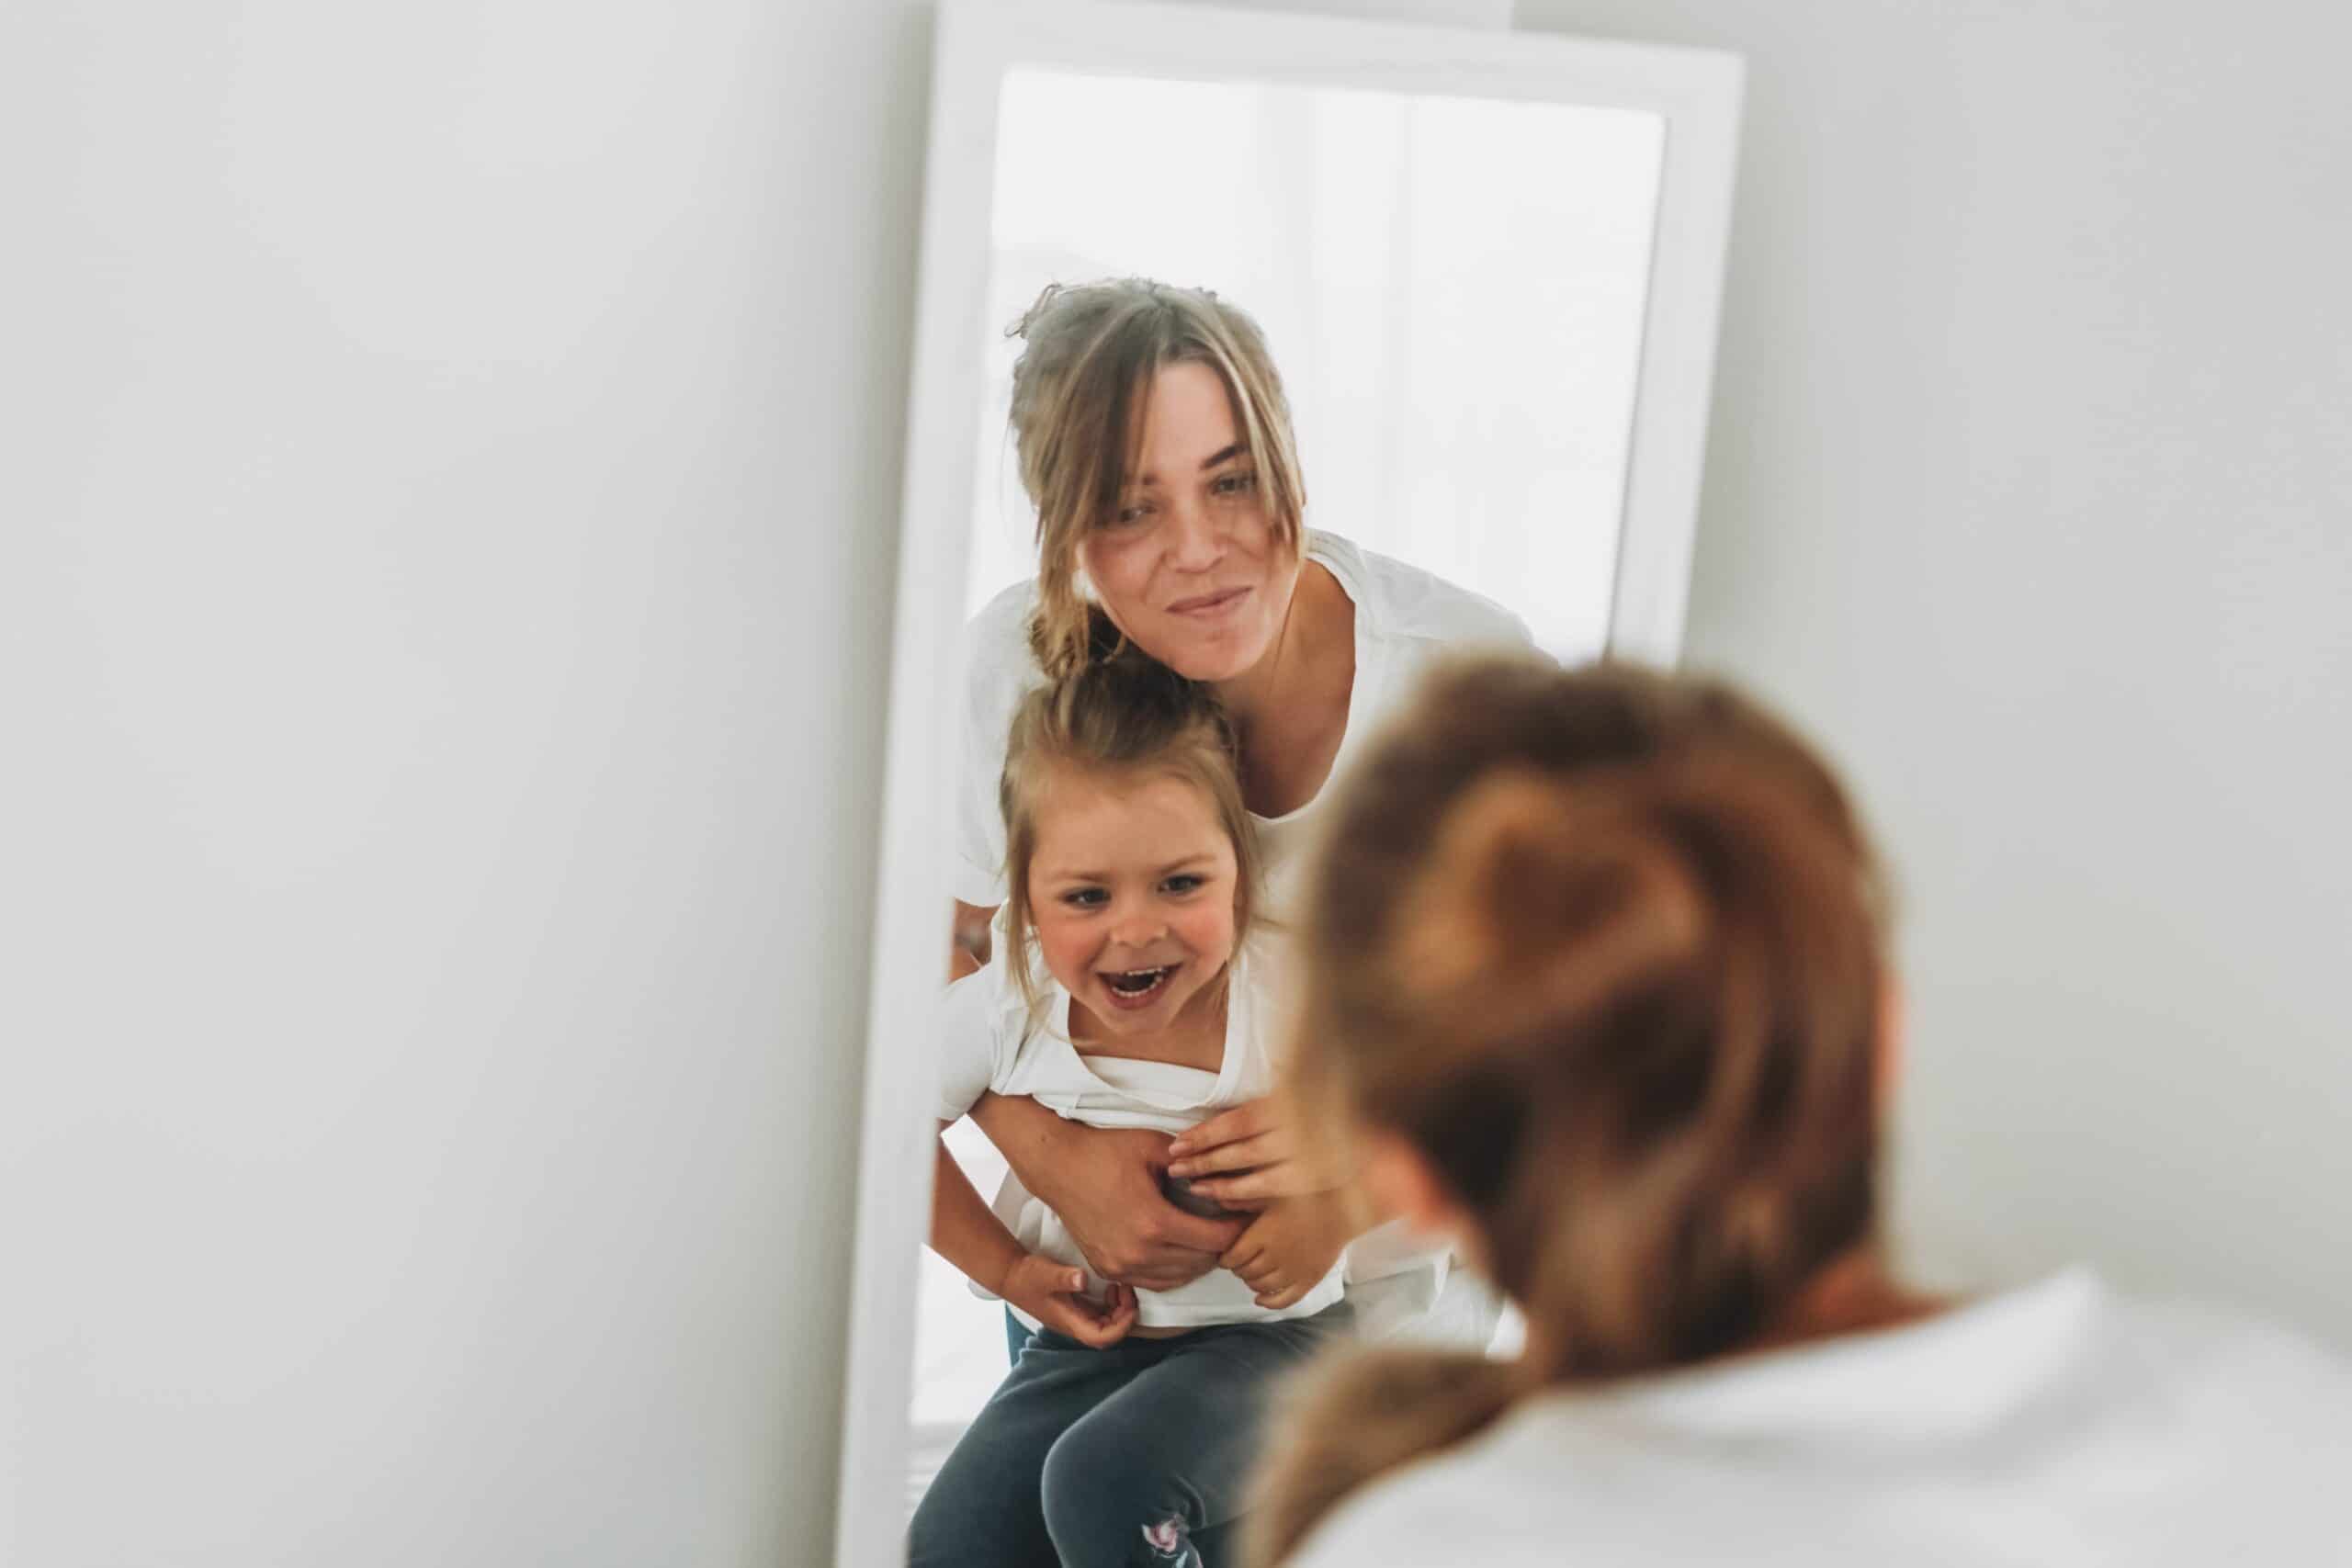 https://www.mother.ly/wp-content/uploads/2022/03/young-mother-and-daughter-in-white-t-shirts-look-in-the-mirror-family-having-fun_t20_E0Rvv4-scaled.jpg